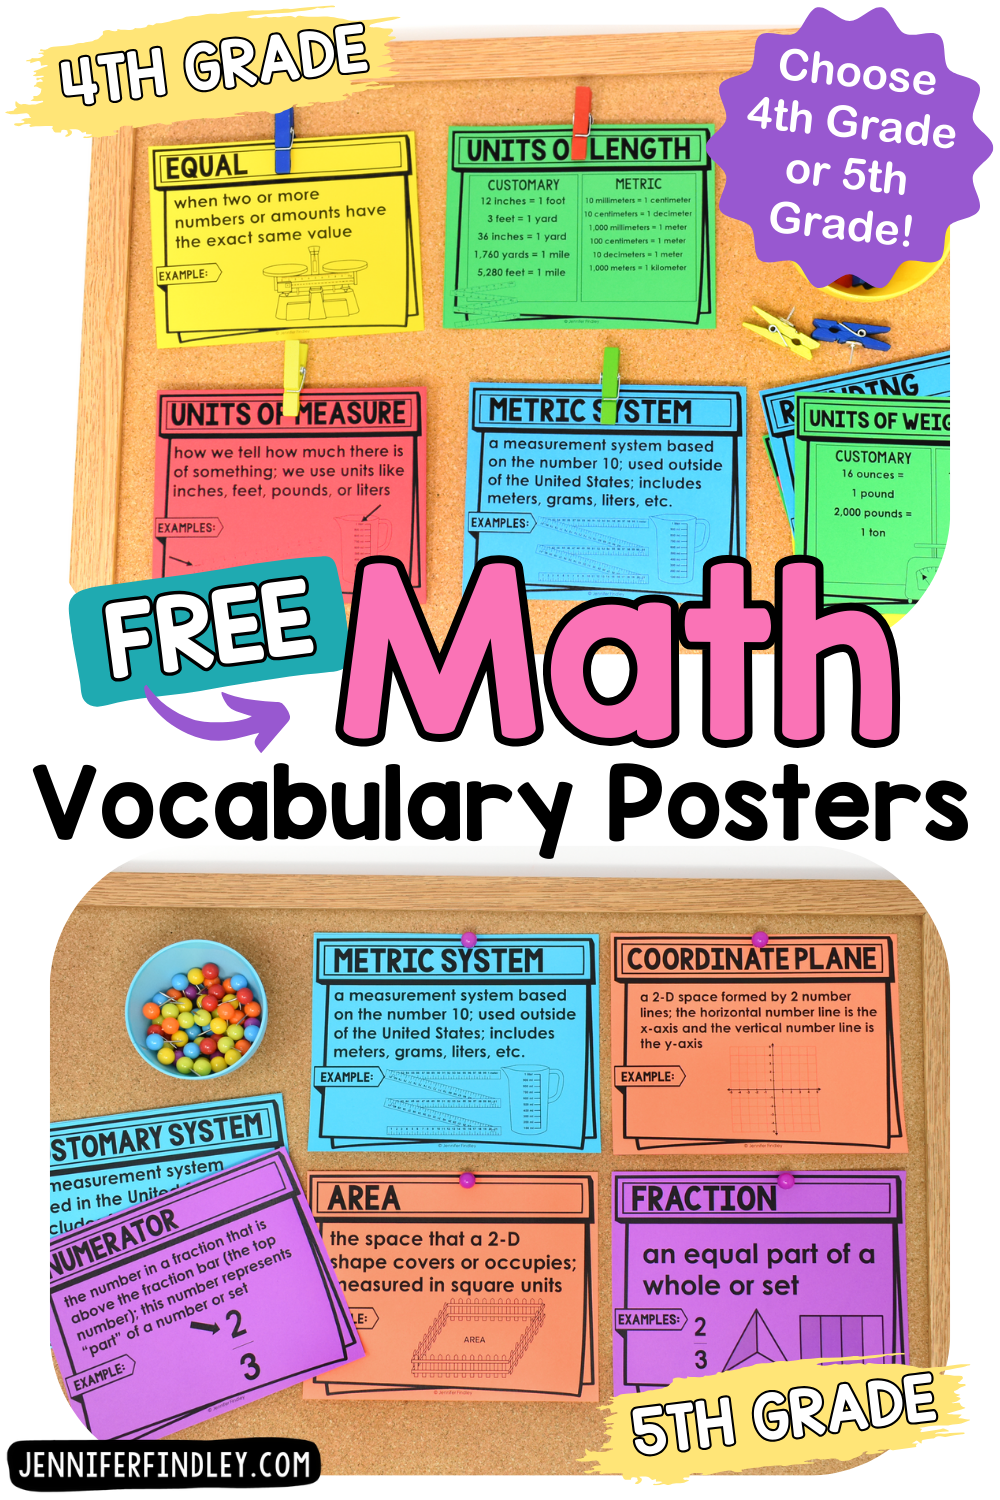 Free math vocabulary posters for 4th and 5th grade